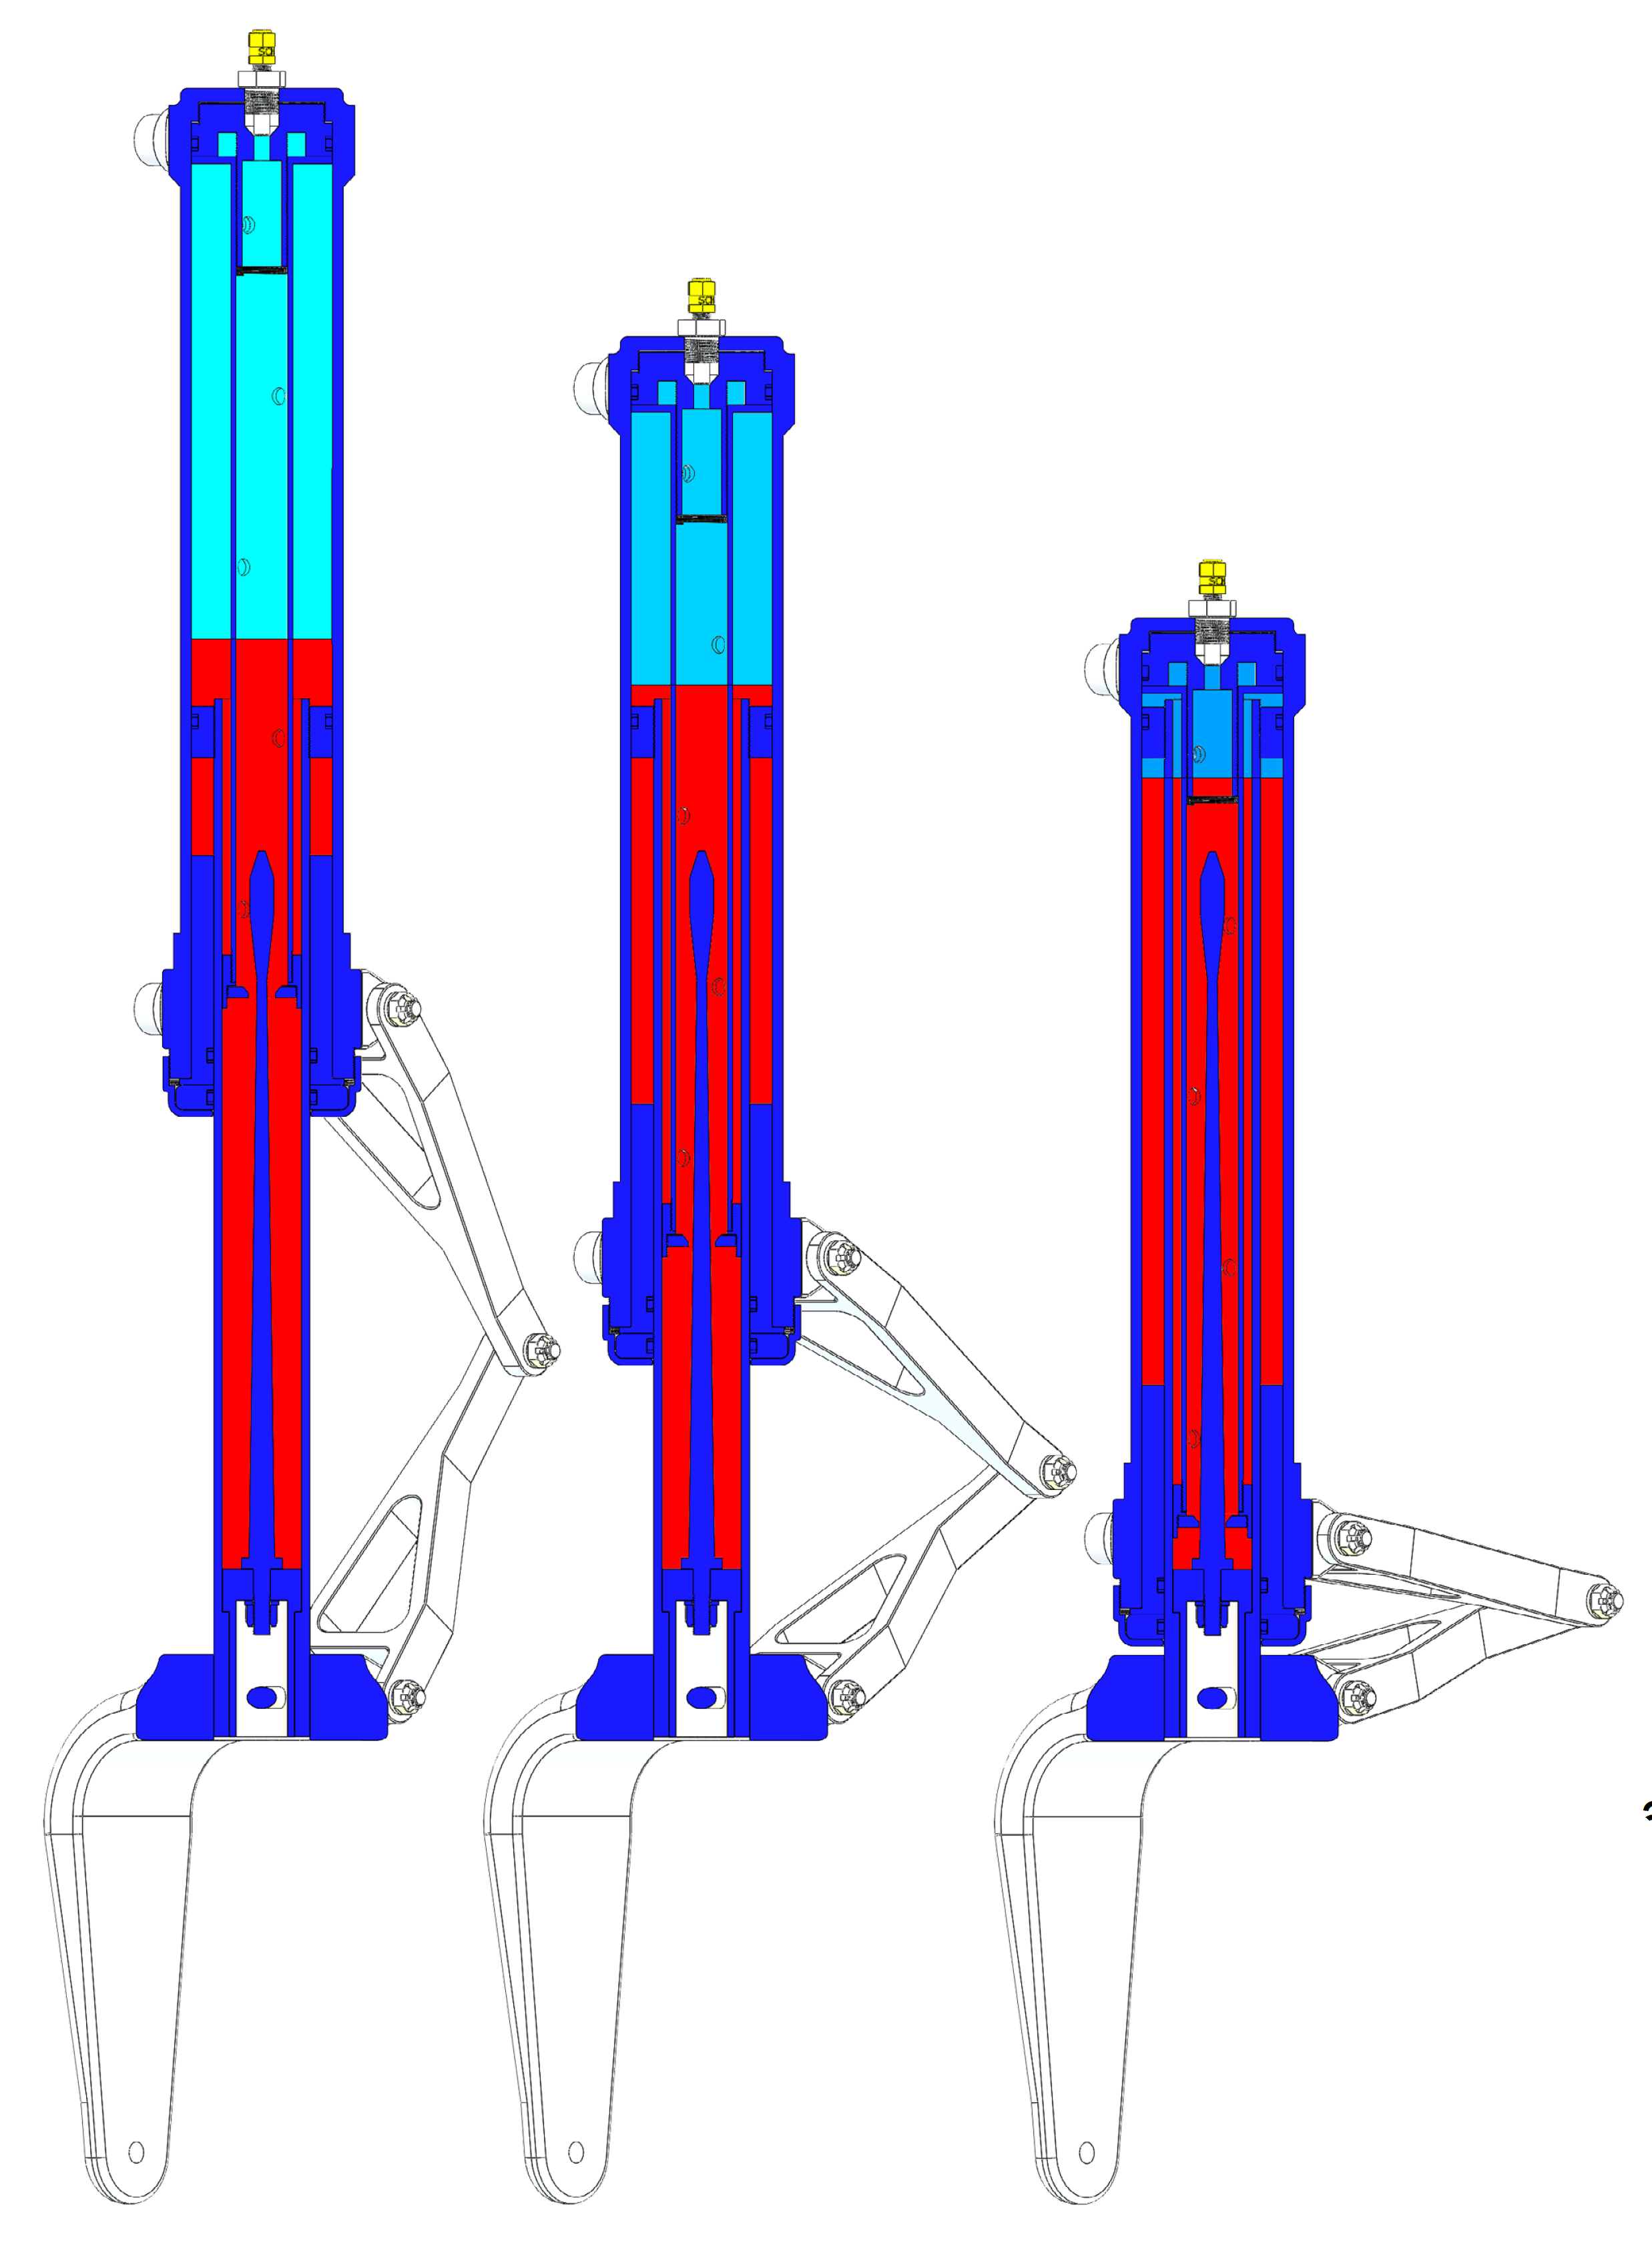 Diagram illustrating the interaction between the gas (light blue) and hydraulic fluid (red) in an oleo strut during compression of the strut. Source: Rainbow Aviation Services